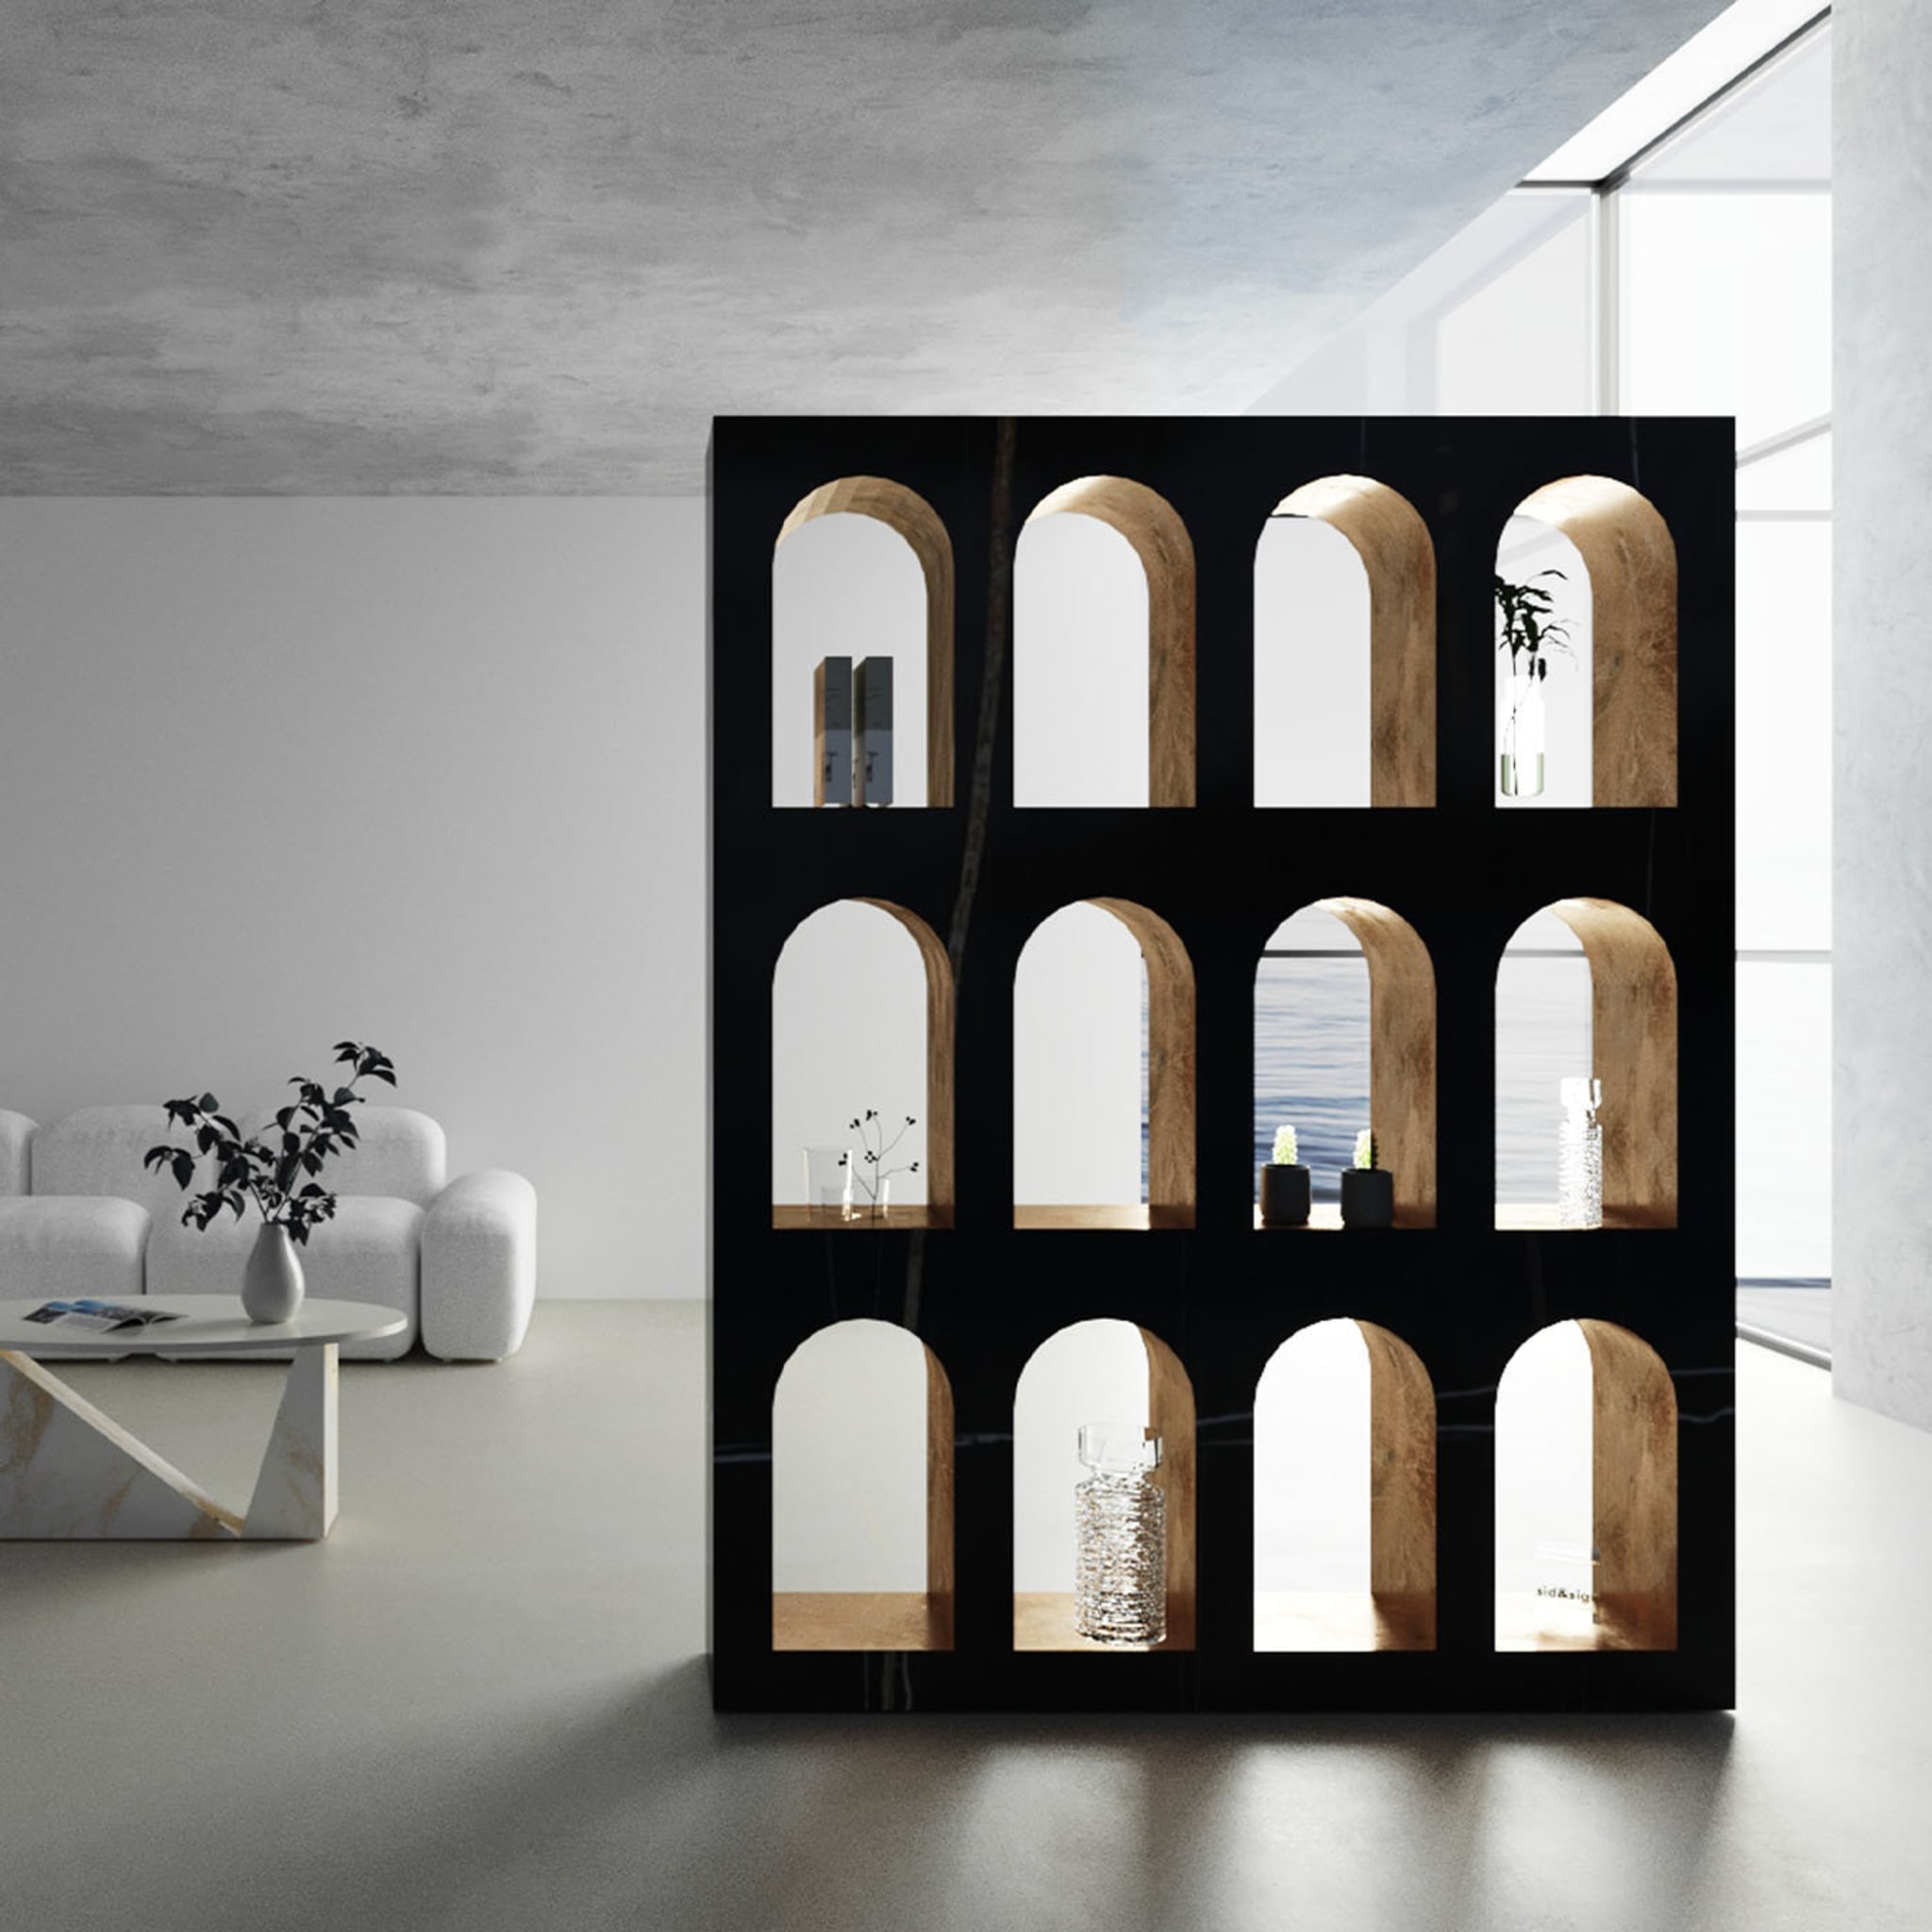 Portici Bookcase in Sahara Noir Marble by sid&sign - Alternative view 2